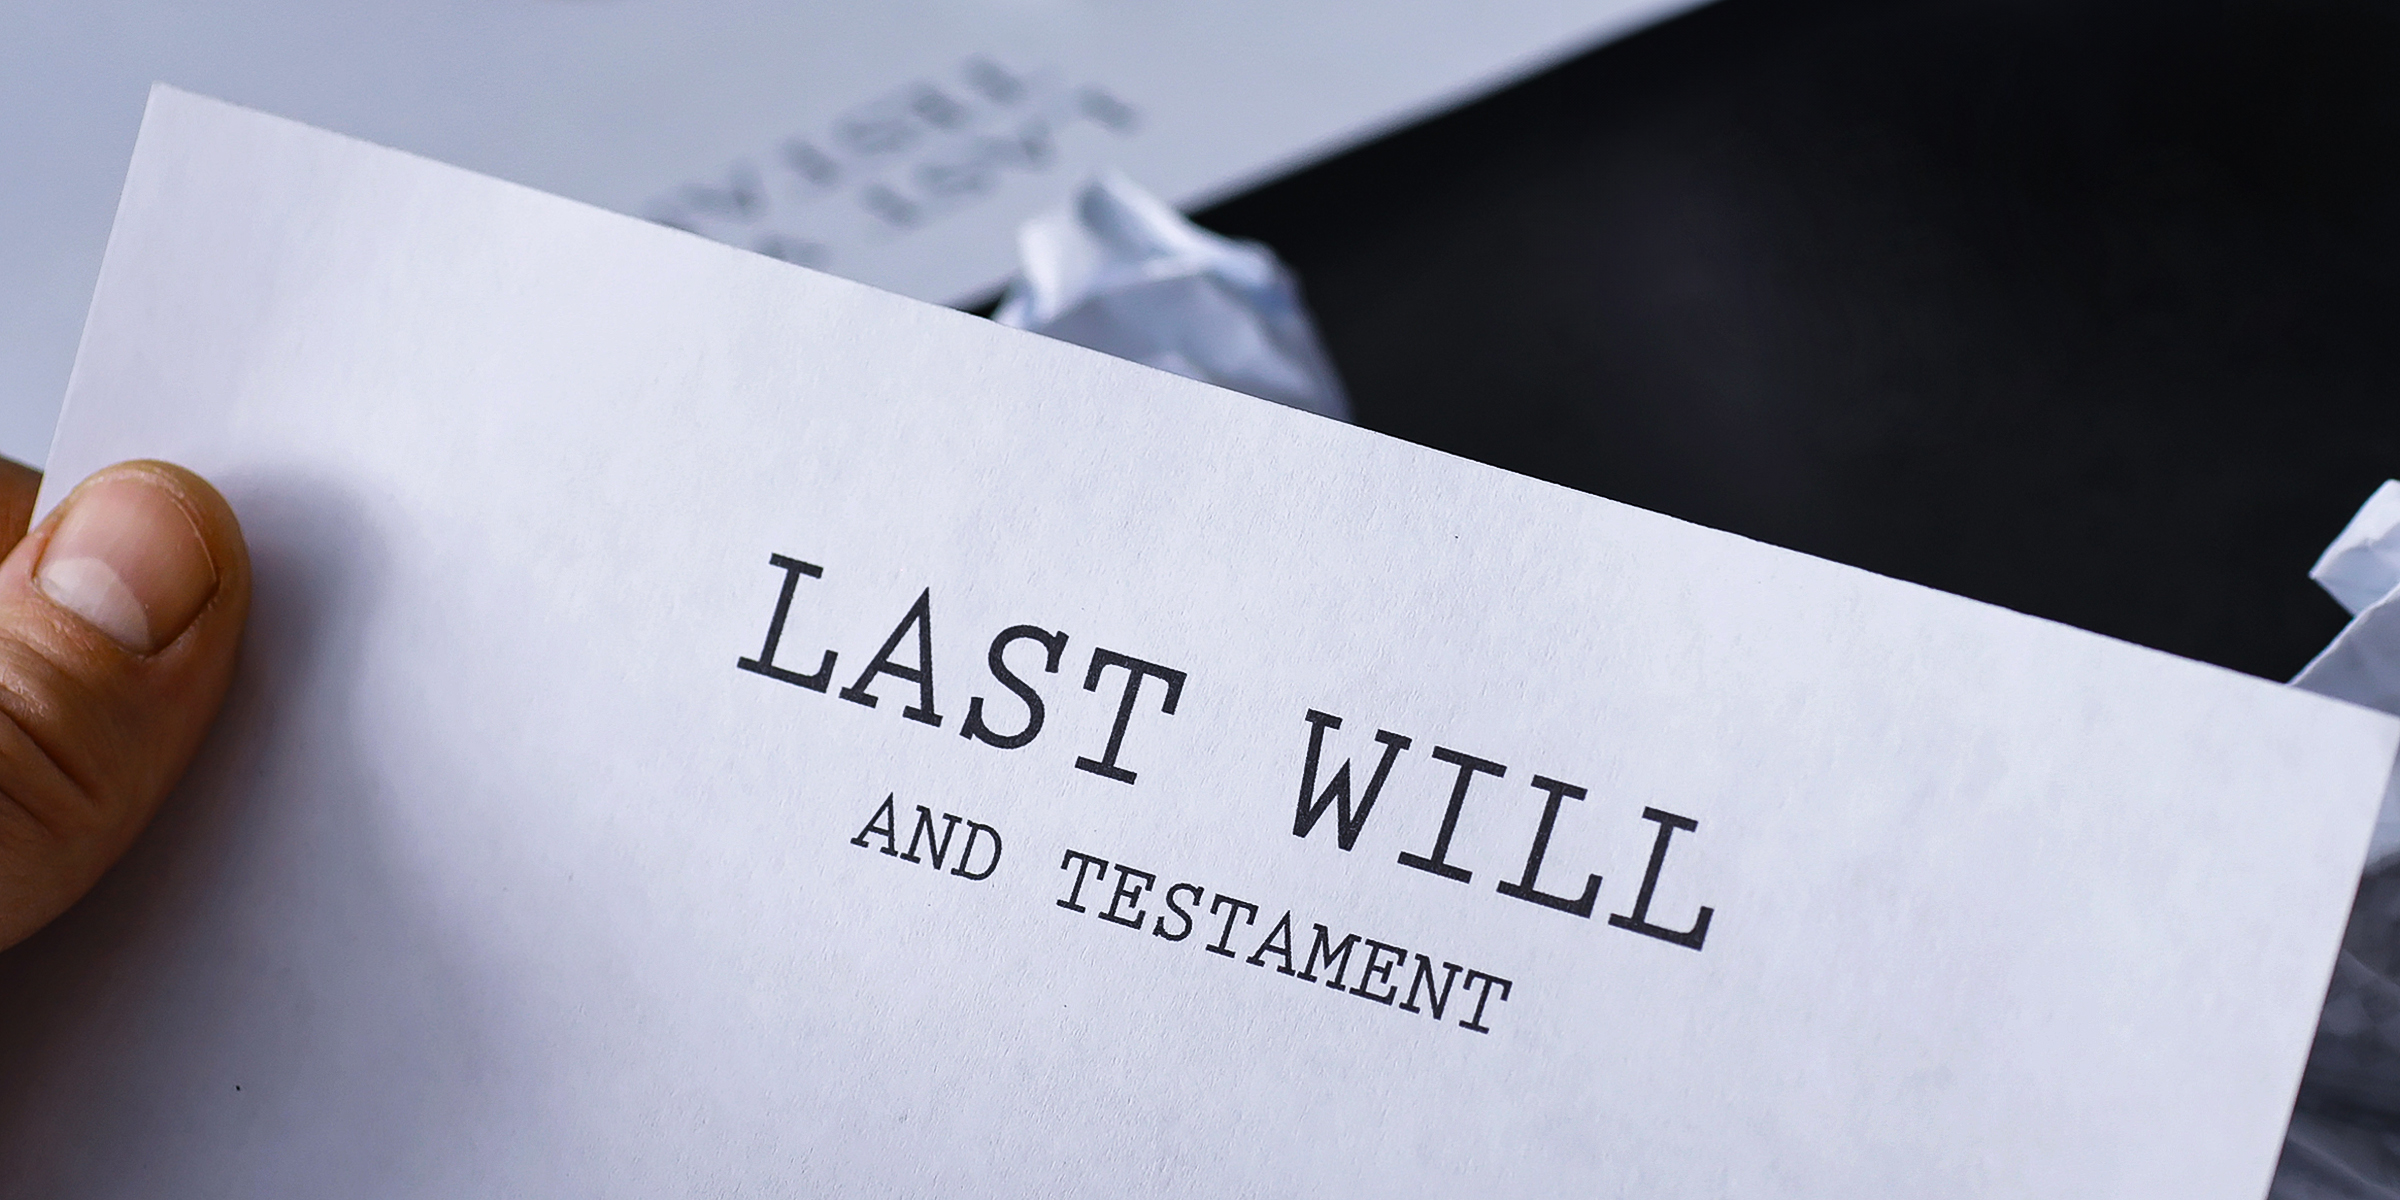 A printed page bearing the title "Last Will and Testament" | Source: Shutterstock